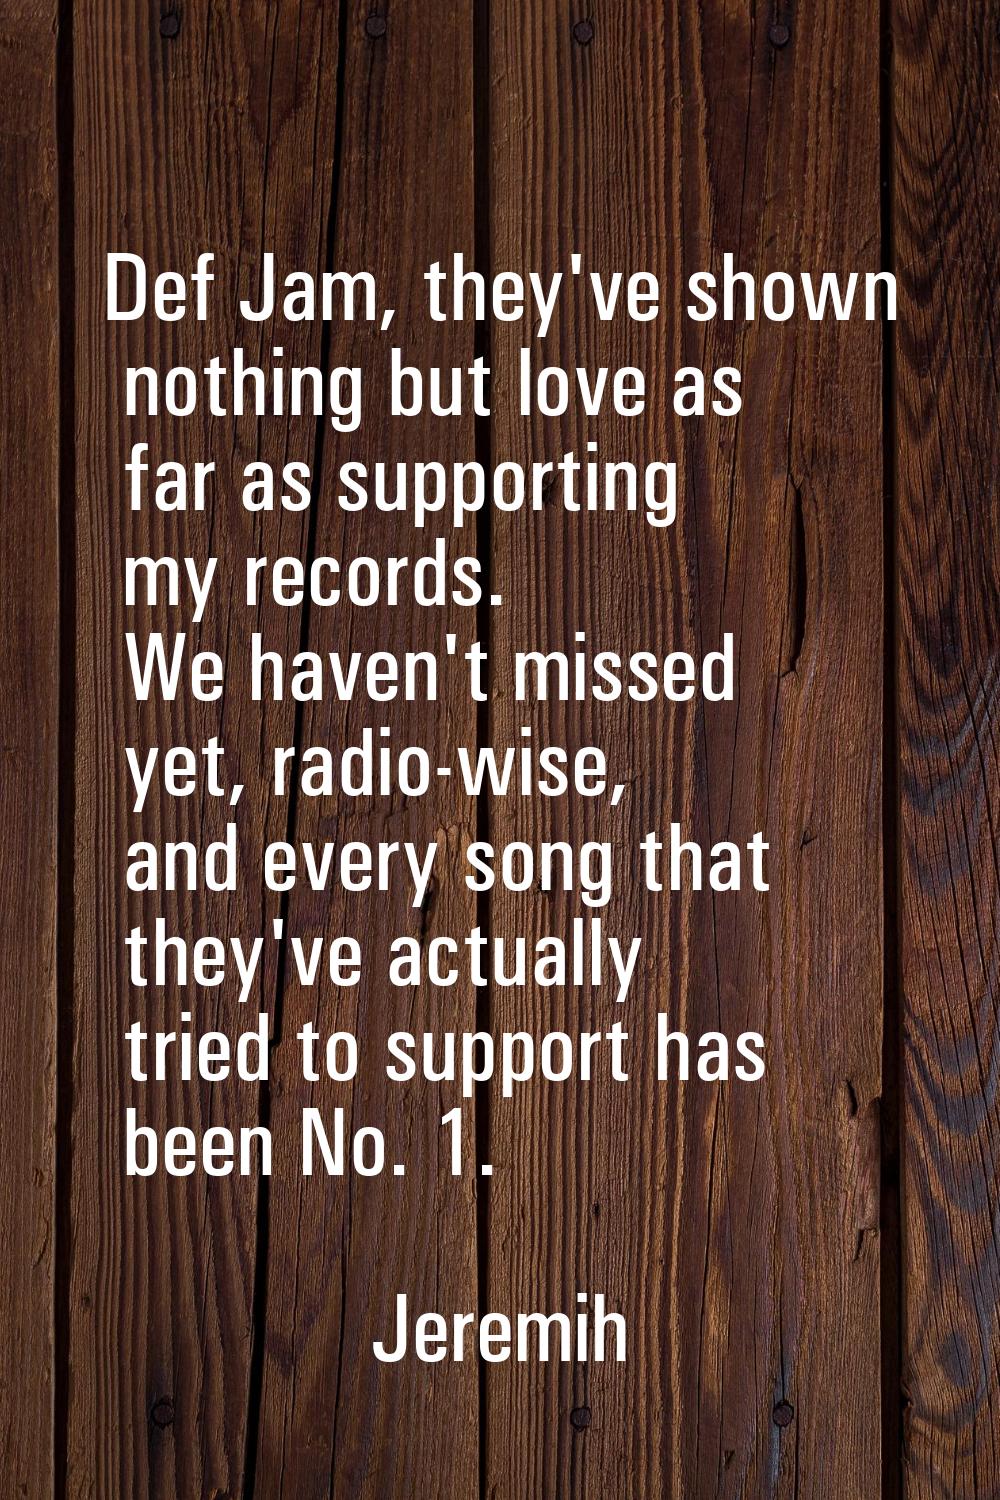 Def Jam, they've shown nothing but love as far as supporting my records. We haven't missed yet, rad